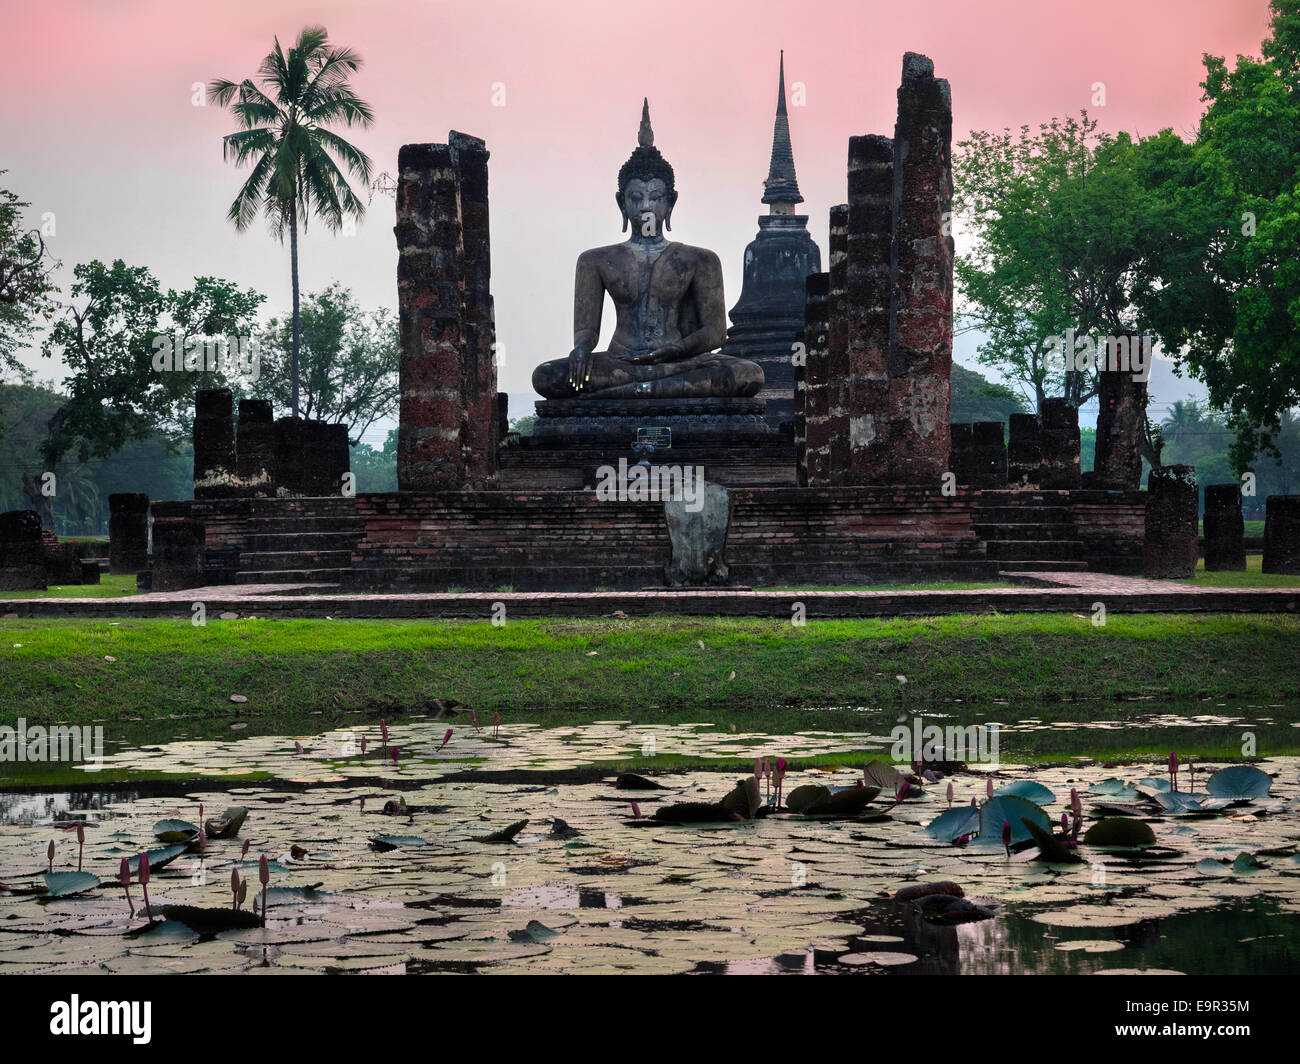 Buddha statue and ruins of Wat Mahathat temple in Sukhothai, Thailand. Stock Photo